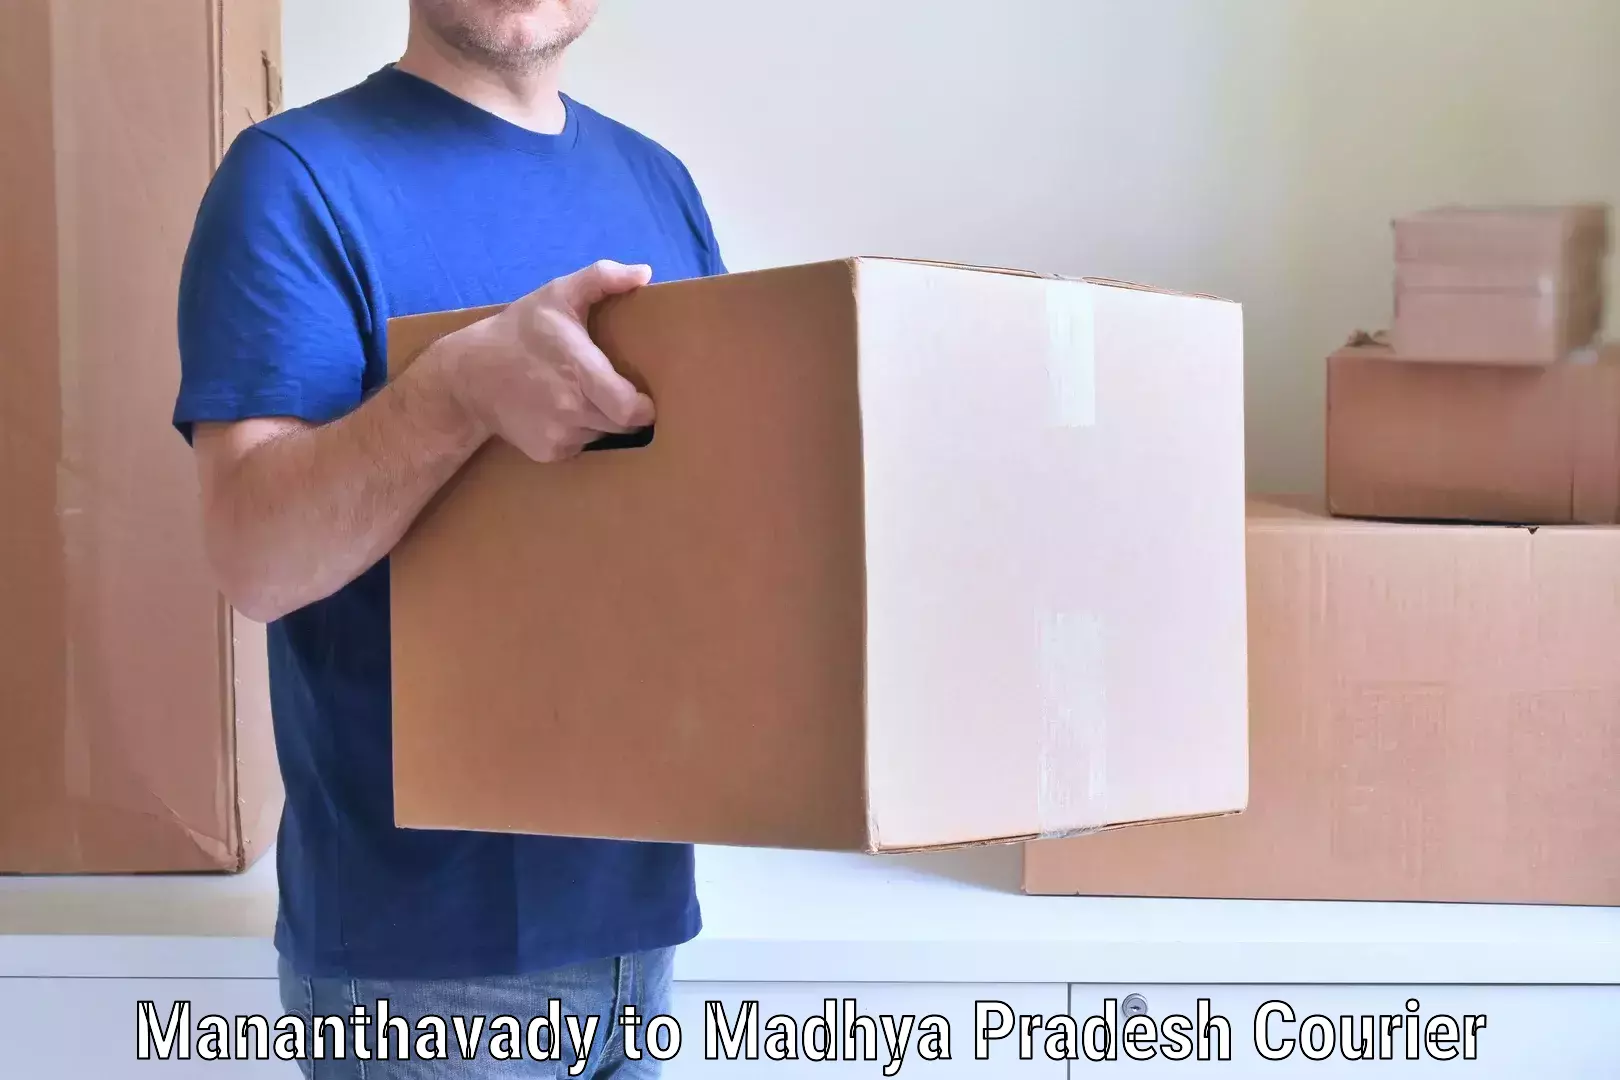 Furniture delivery service Mananthavady to Thikri